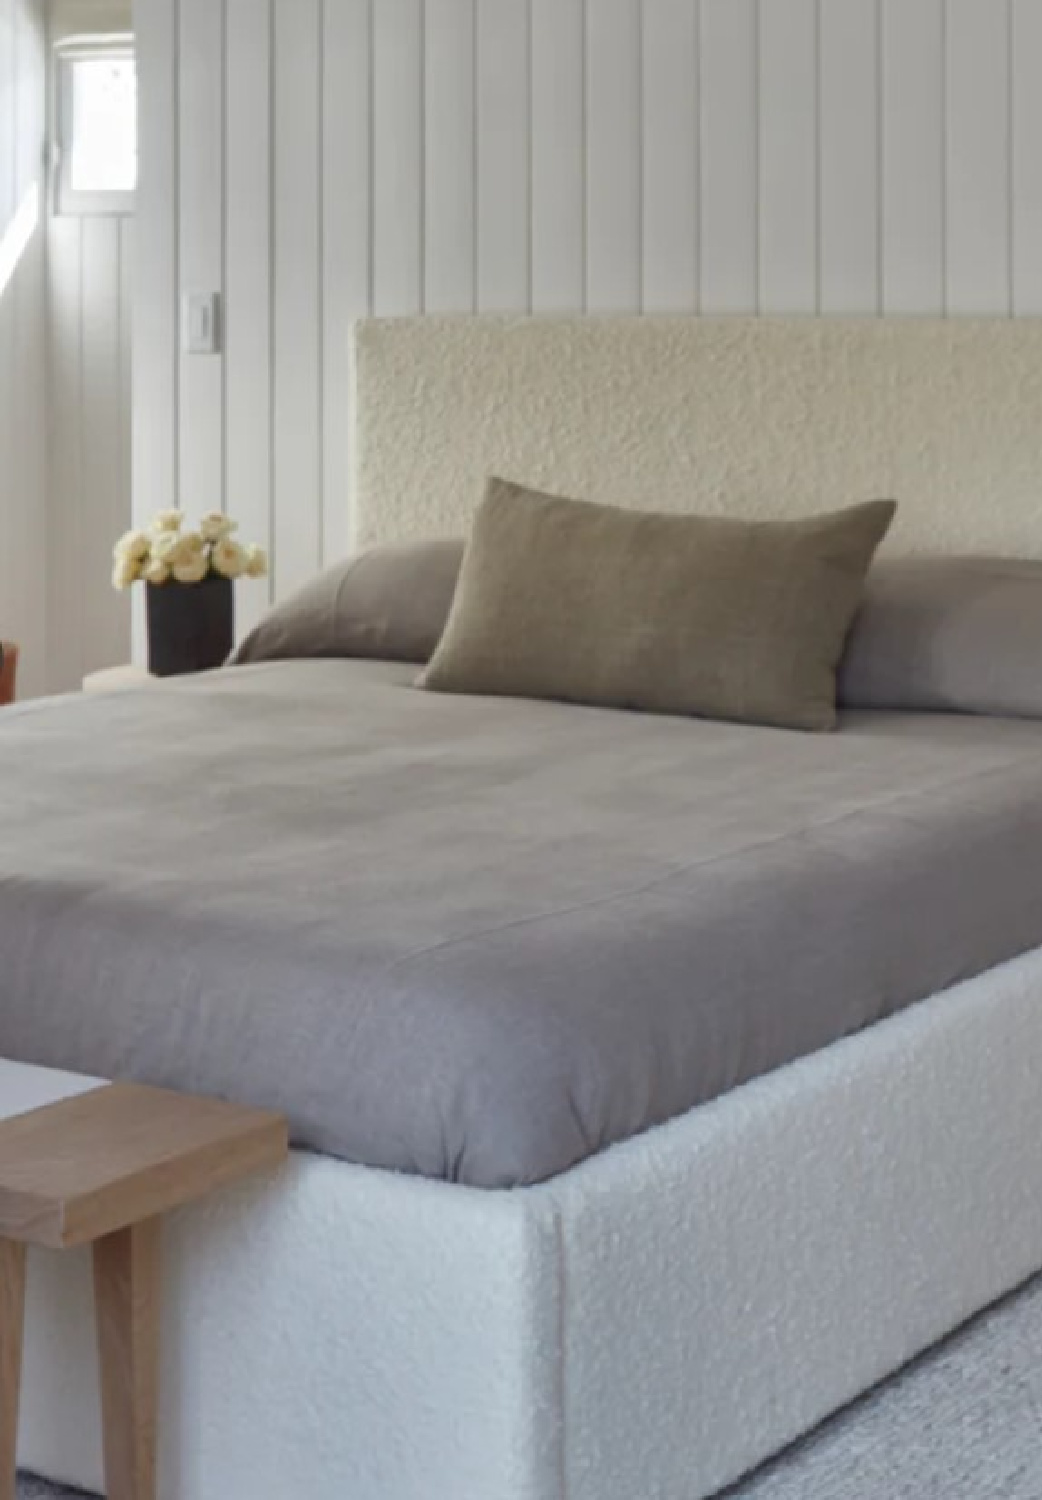 Jenni Kayne Home bedroom with neutral, timeless, minimal California casual style.